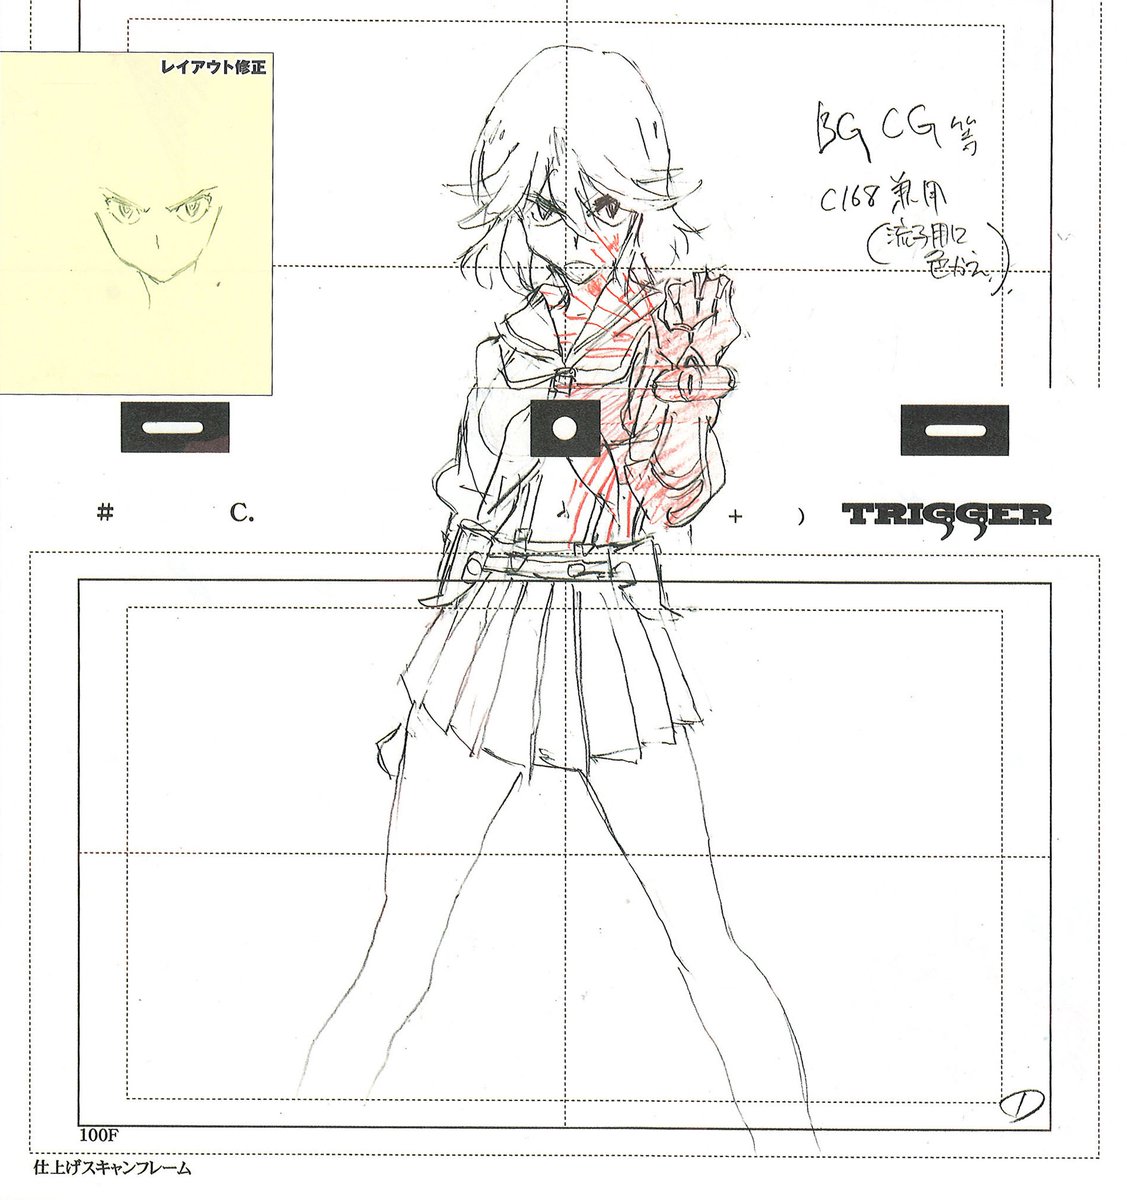 Kill la Kill (キルラキル) : Transformation Sequence Production Materials.

All by Takeshi Honda (本田雄), except the Animation Director's correction in the first image. 